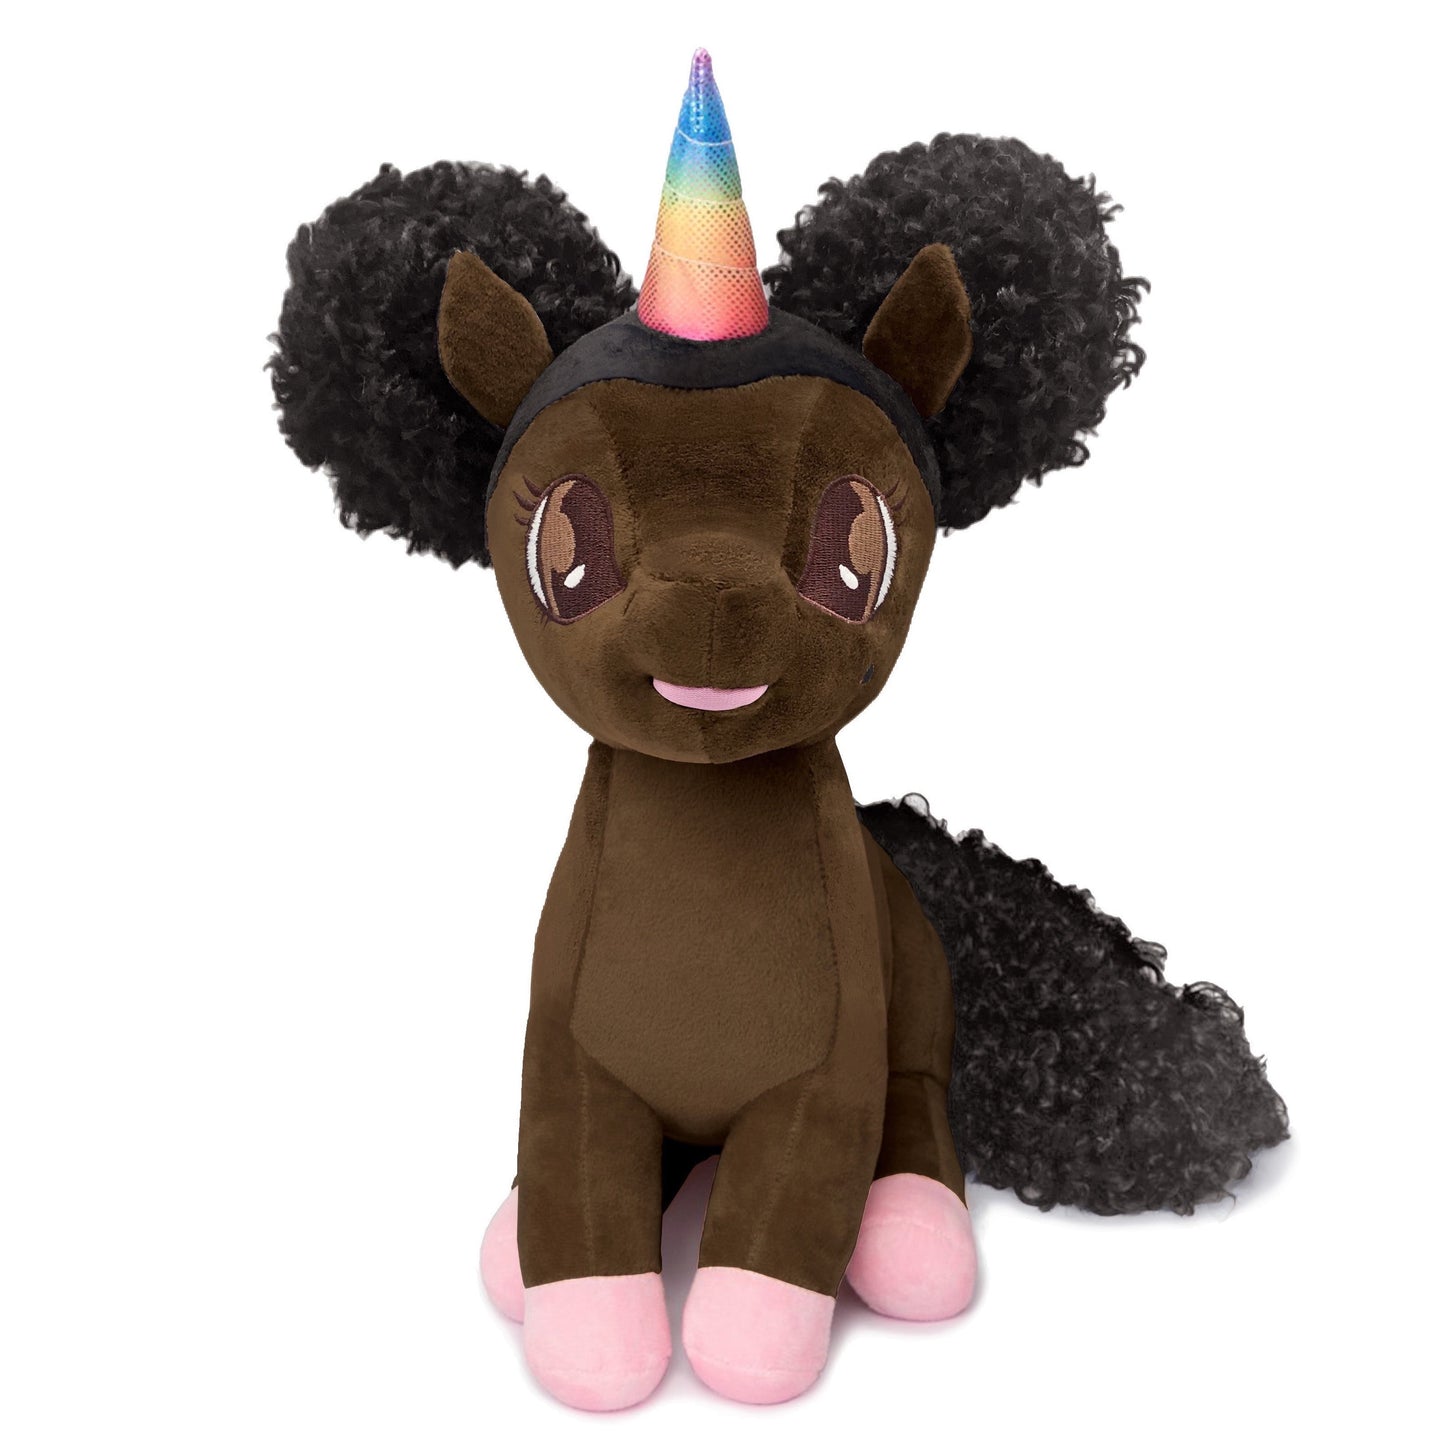 Raven, Unicorn Plush Toy with Afro Puffs - 15 inch